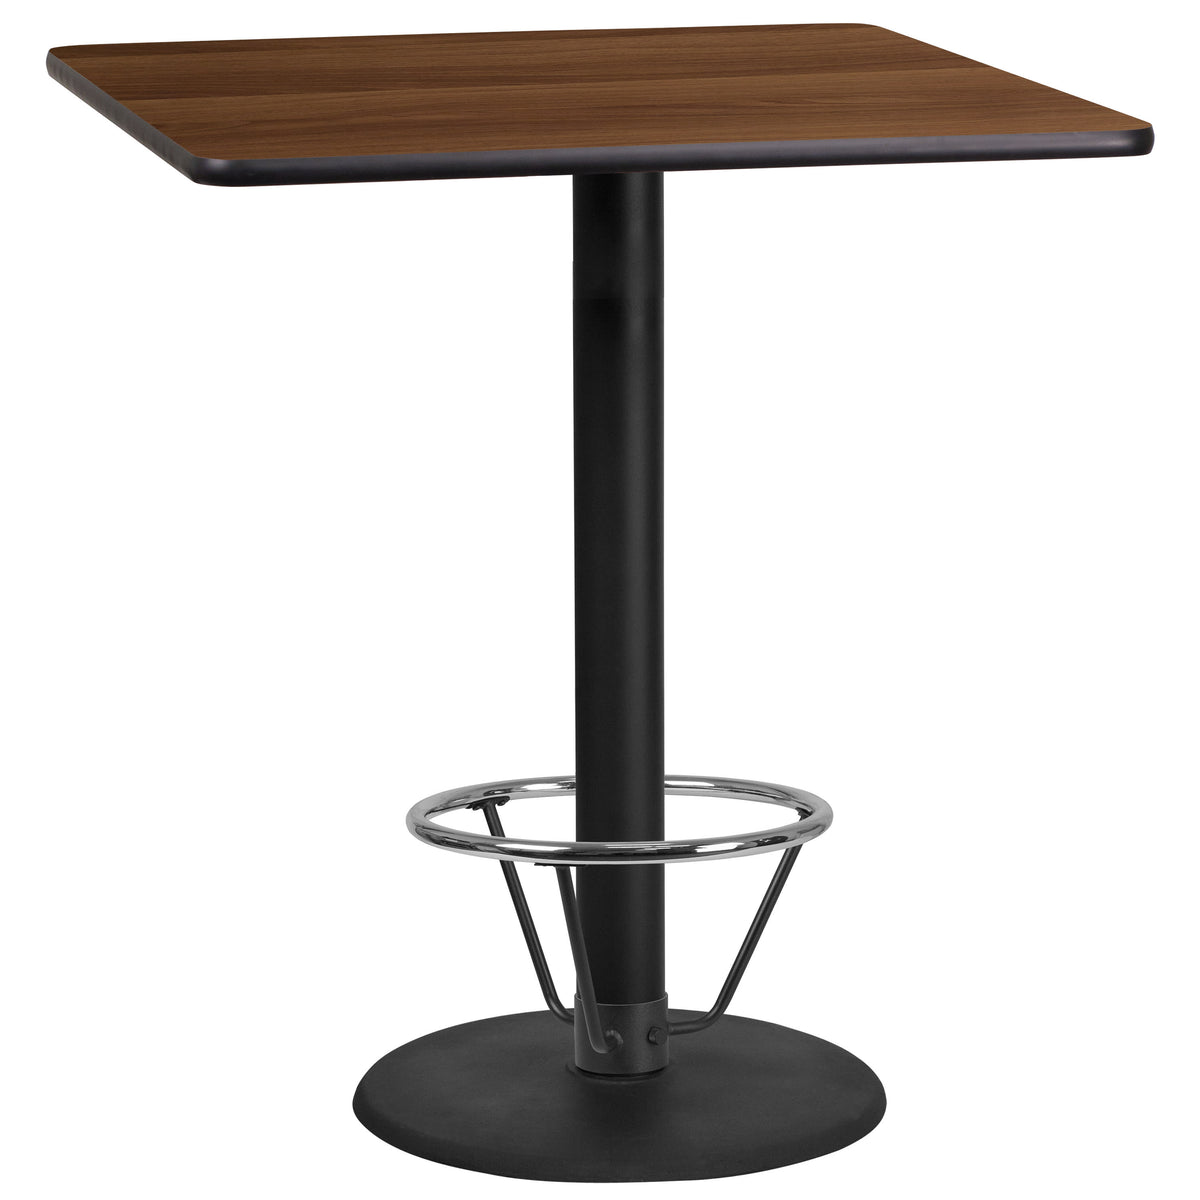 Walnut |#| 36inch SQ Walnut Laminate Table Top & 24inch Round Bar Height Base with Foot Ring